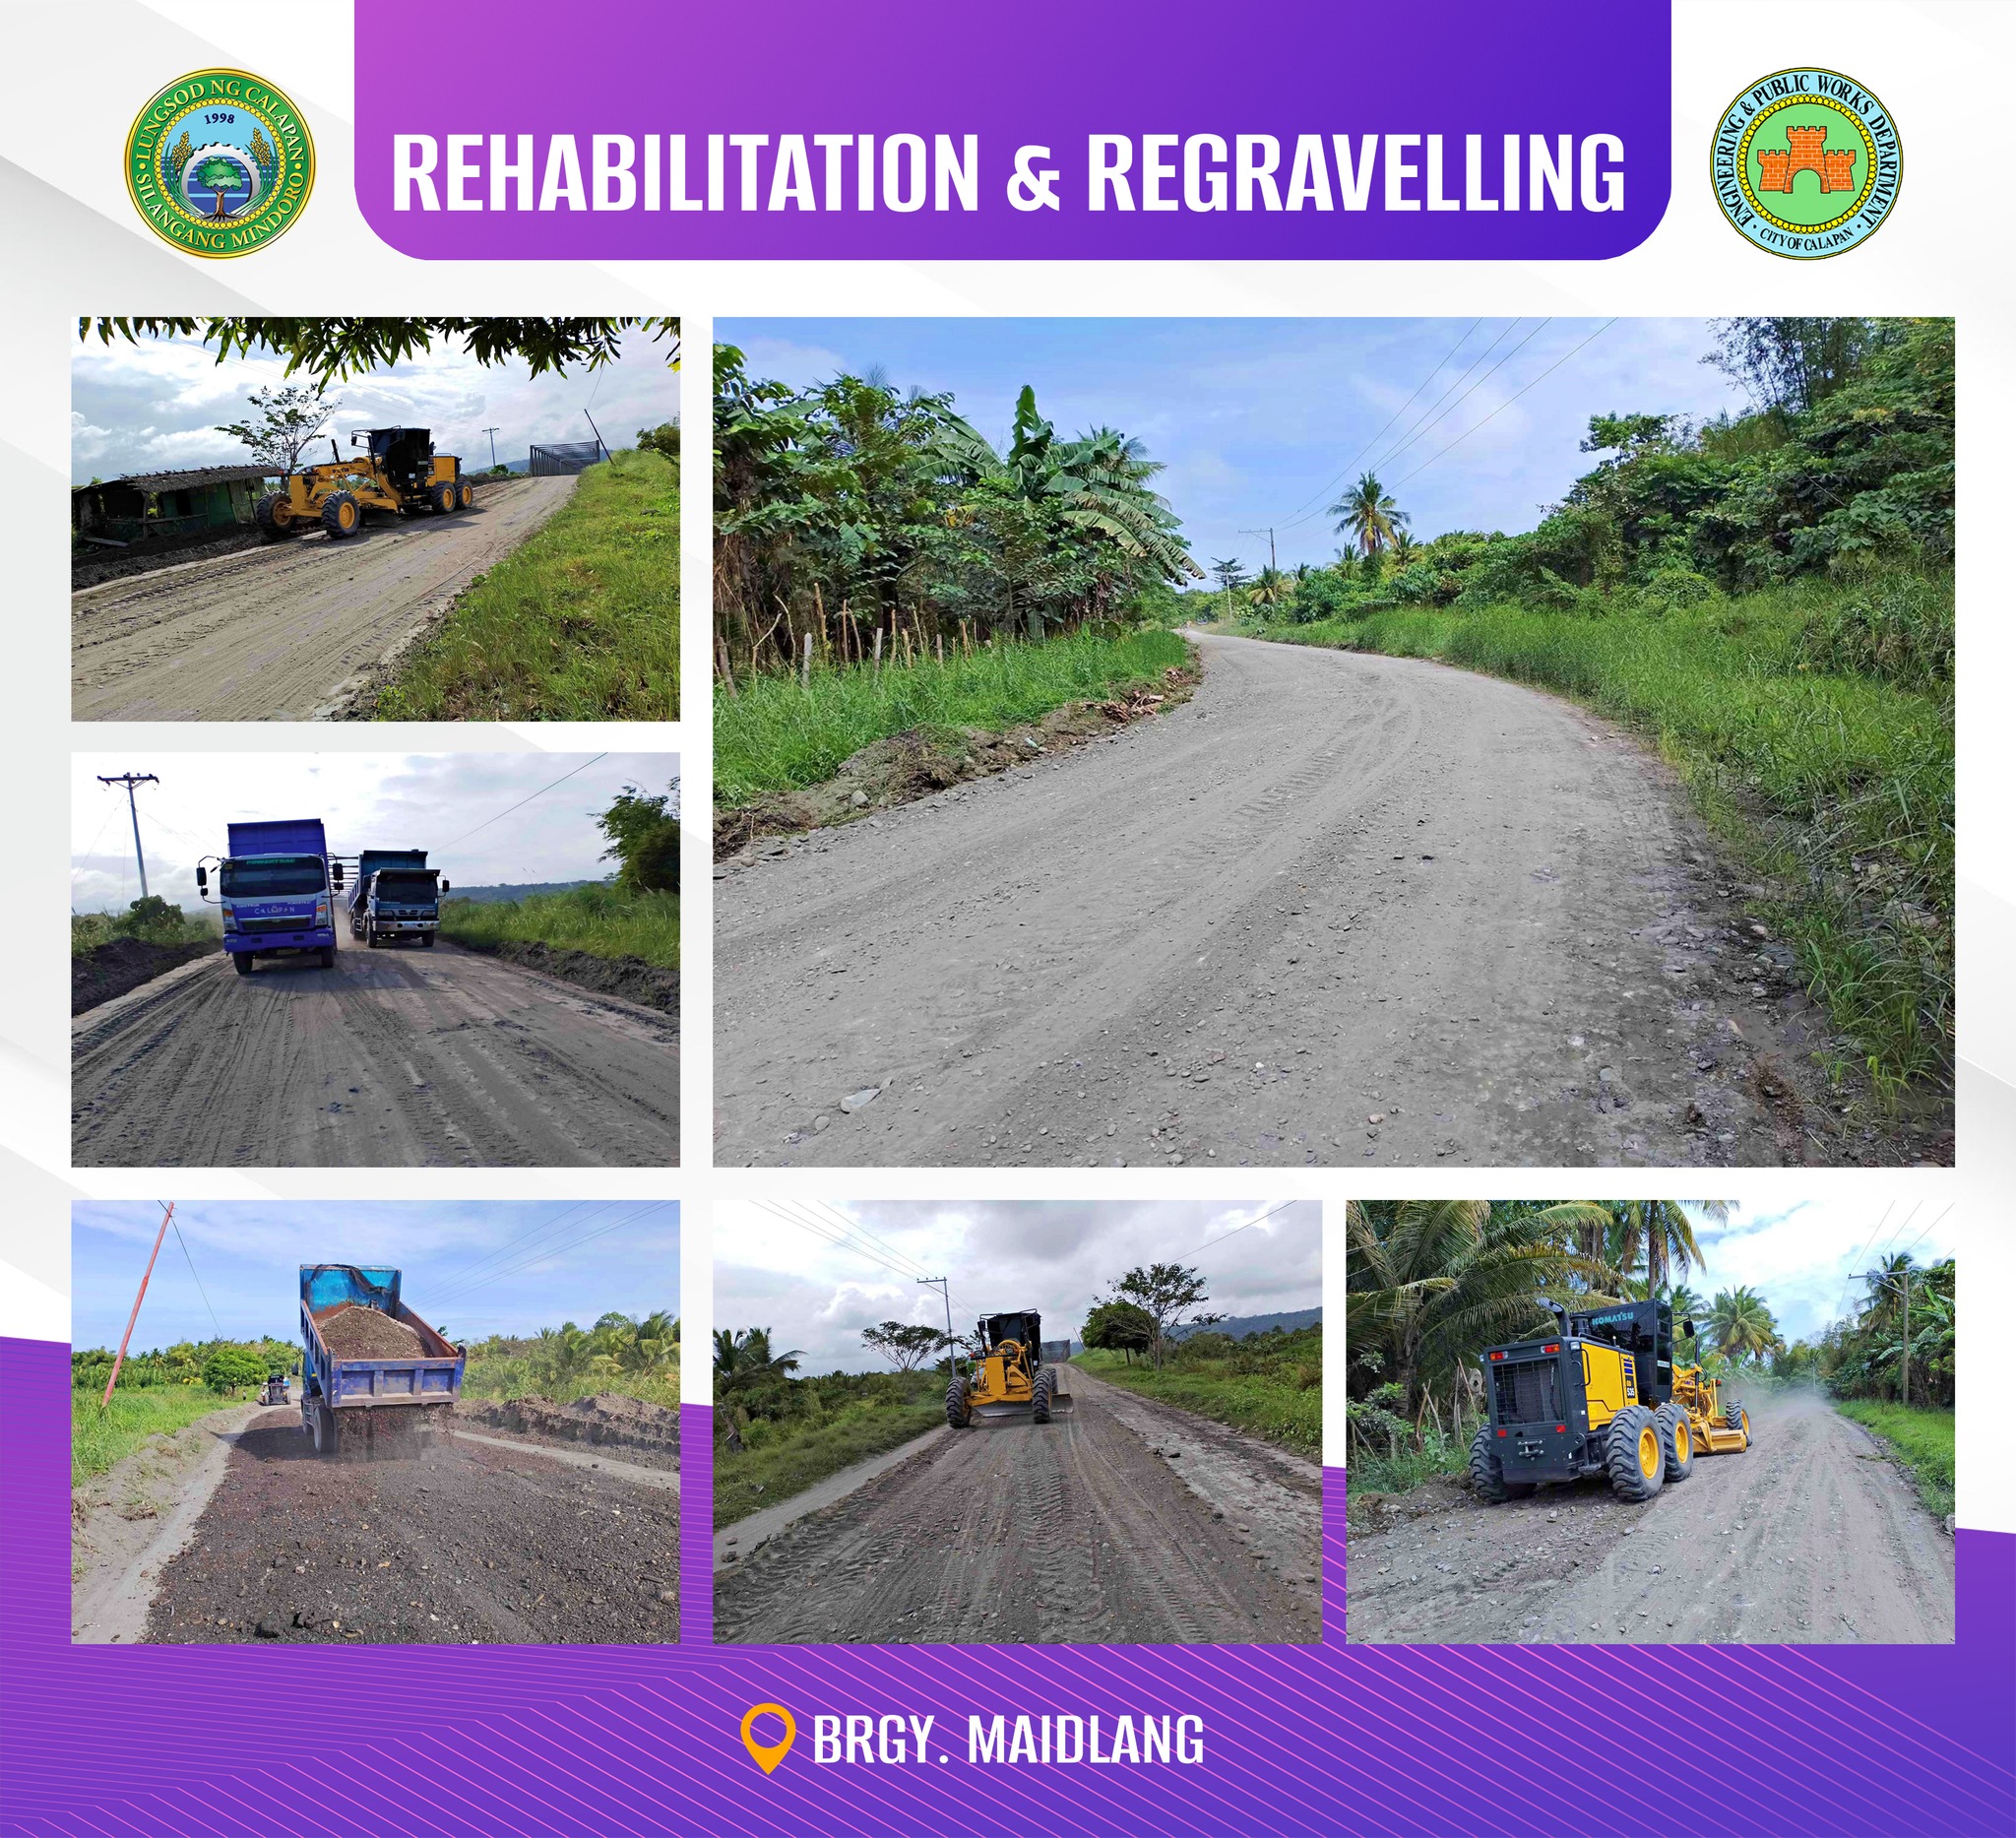 Brgy. Maidlang rehabilitation and regravelling of road going to Abaton Bridge.